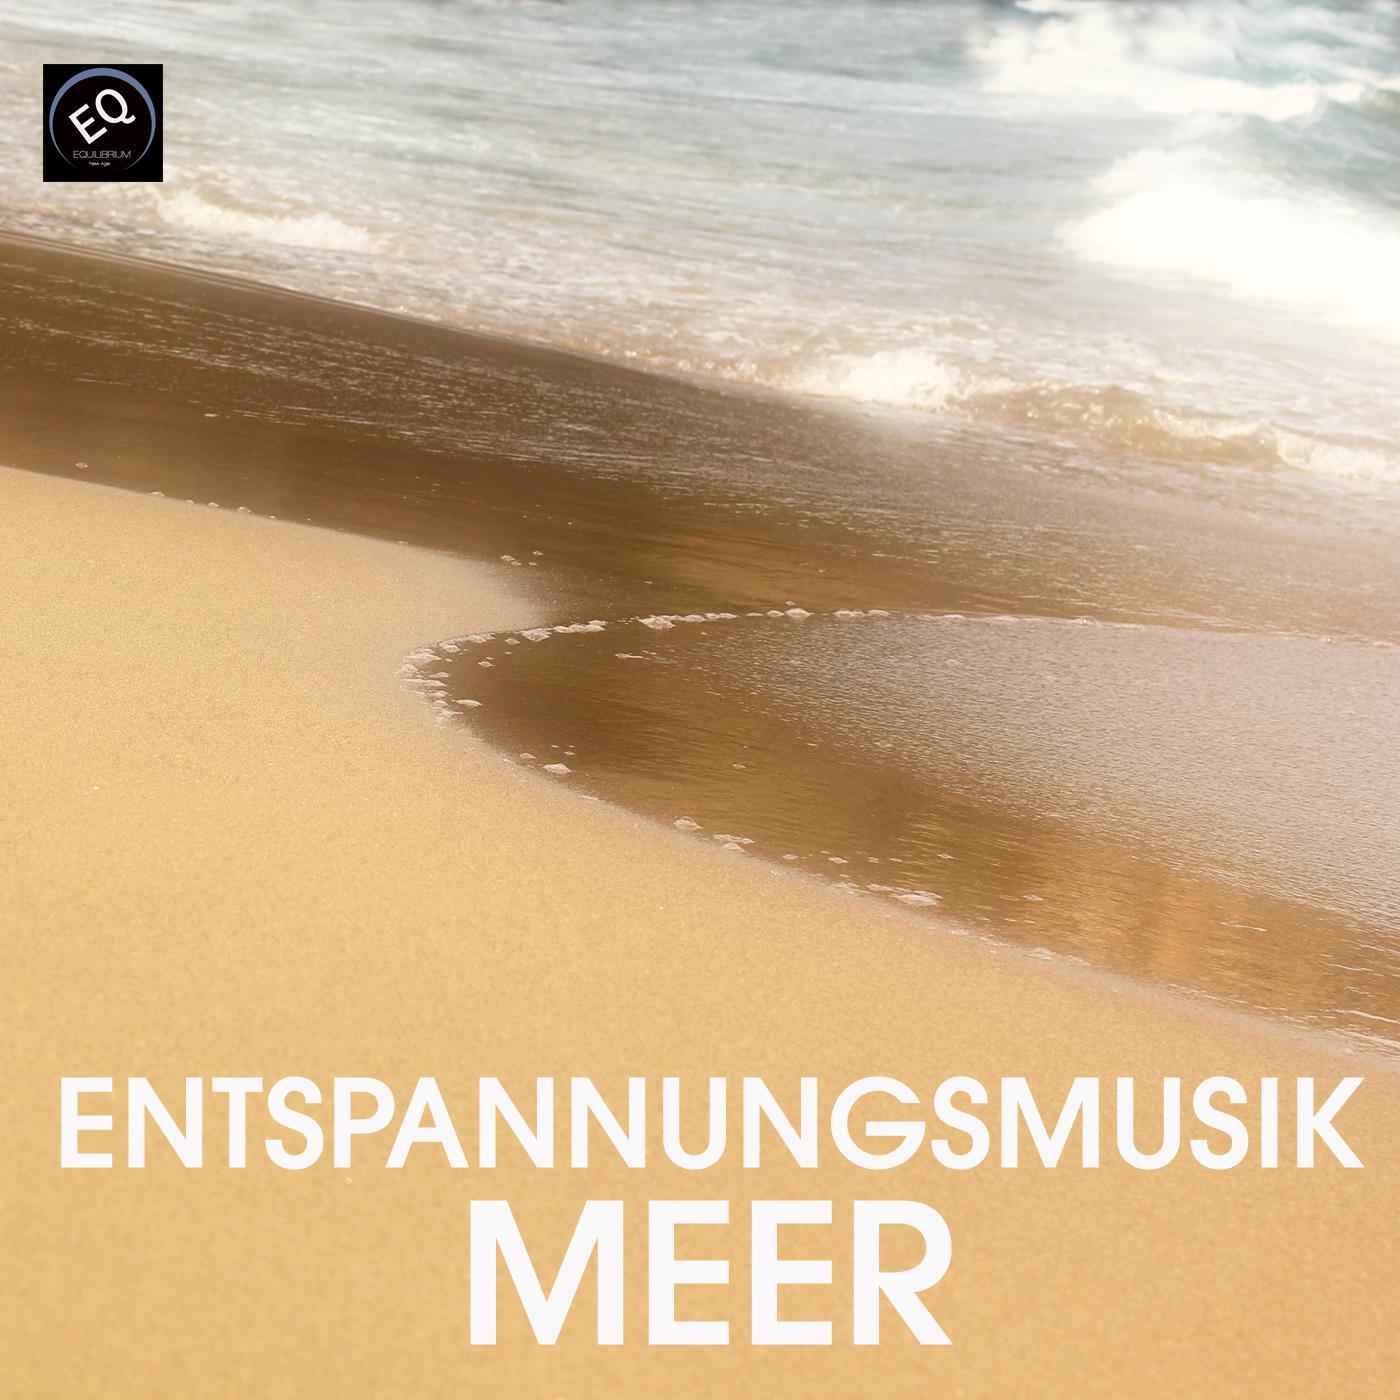 Meeresrauschen 1 - Relaxing Ocean Wave for Relaxation, Meditation and Sound Therapy. Meereswellen